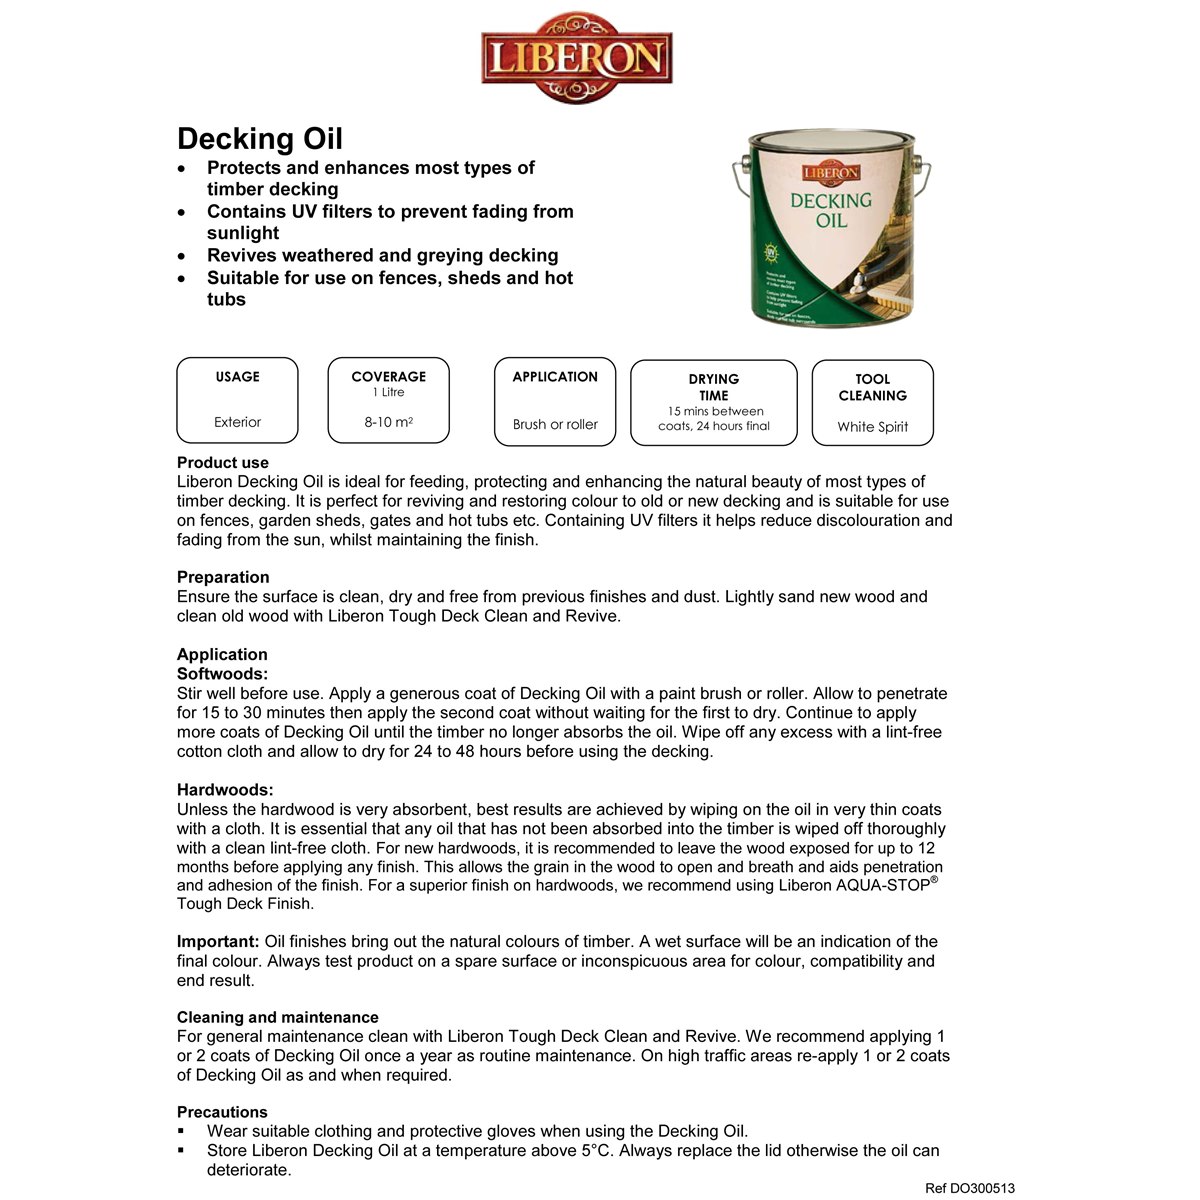 Liberon Decking Oil Product Information